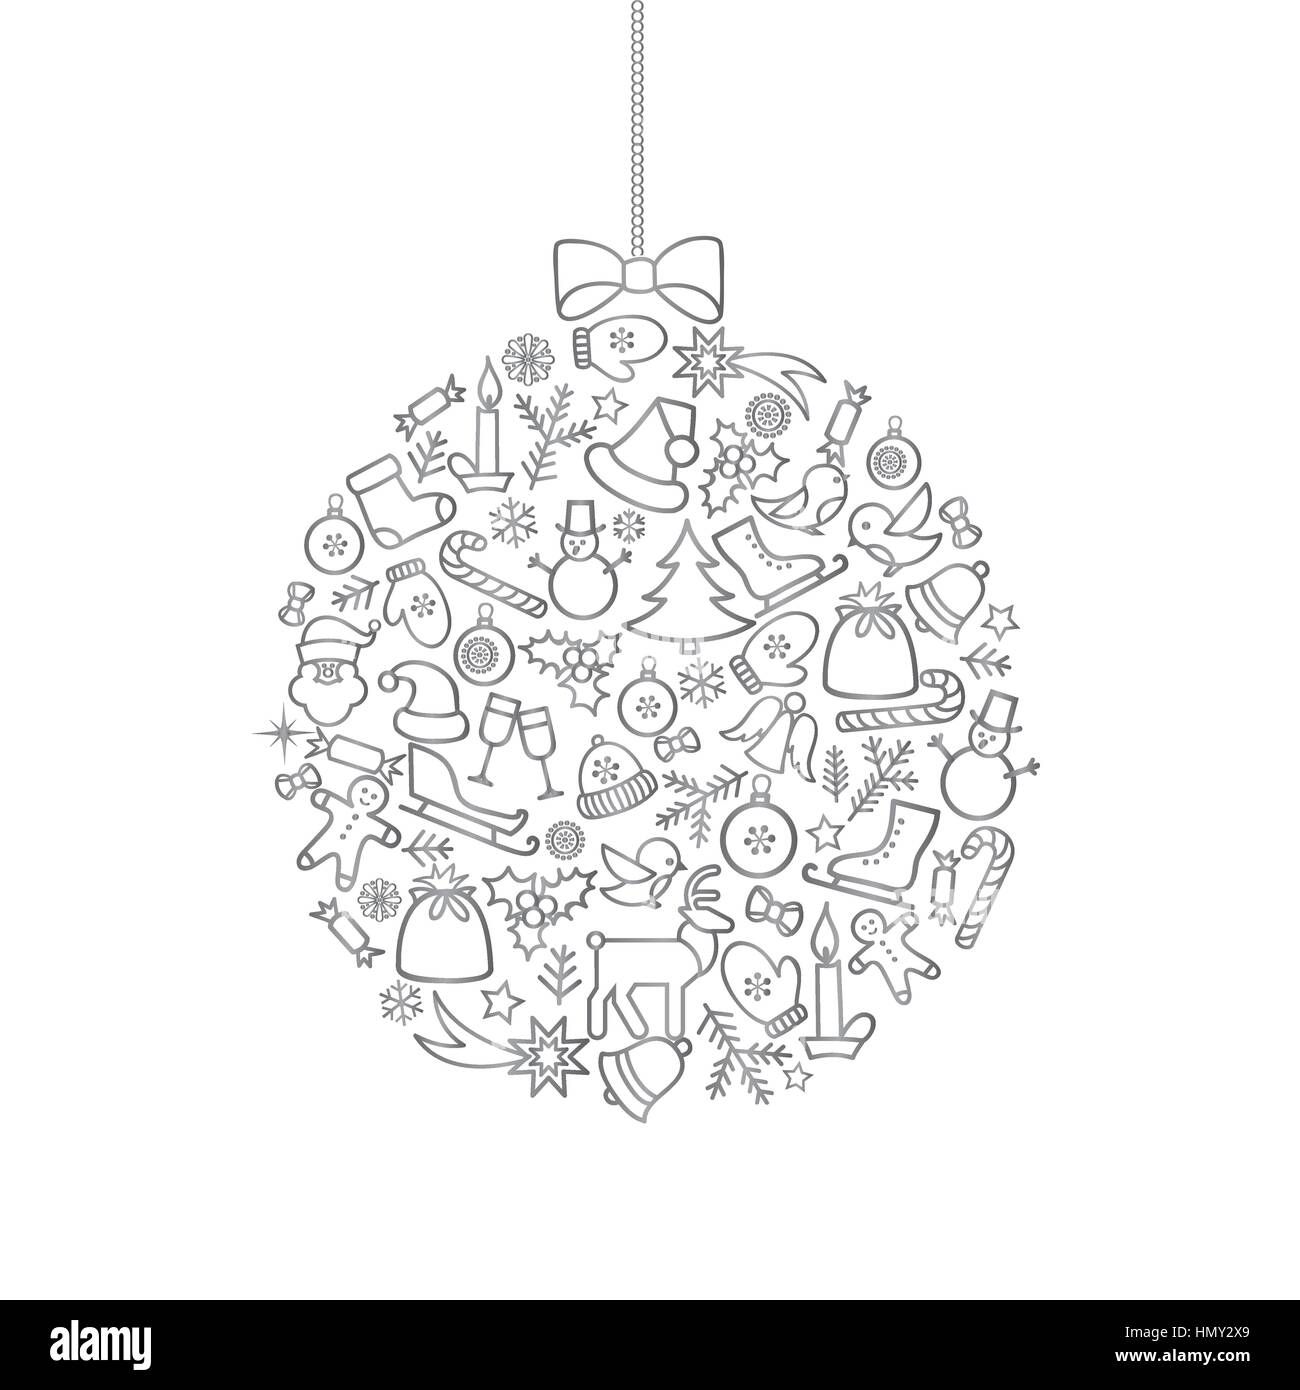 Christmas background with Ball Doodle Decor Elements Happy Winter Holiday Greeting card design with holiday decoration icons